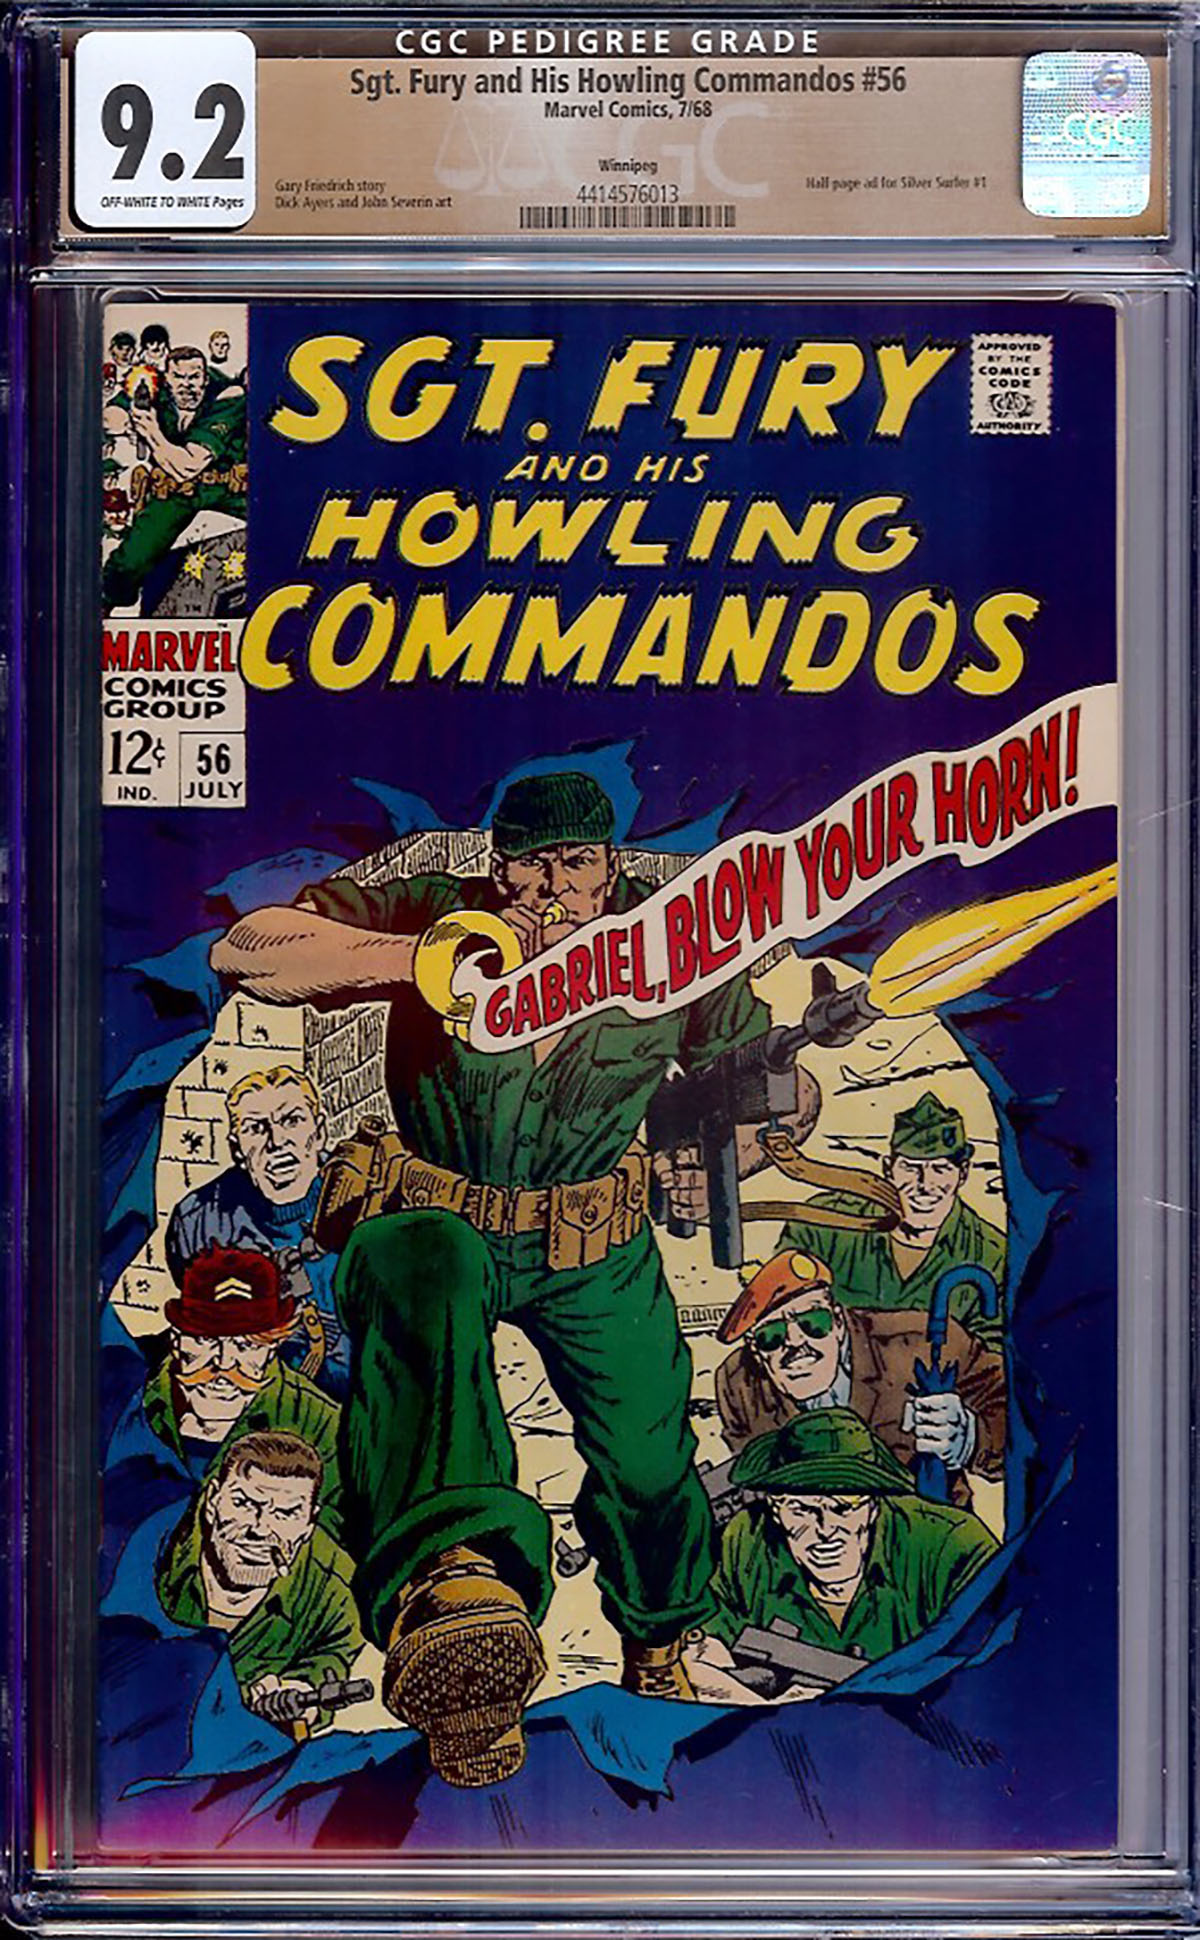 Sgt. Fury and His Howling Commandos #56 CGC 9.2 ow/w Winnipeg